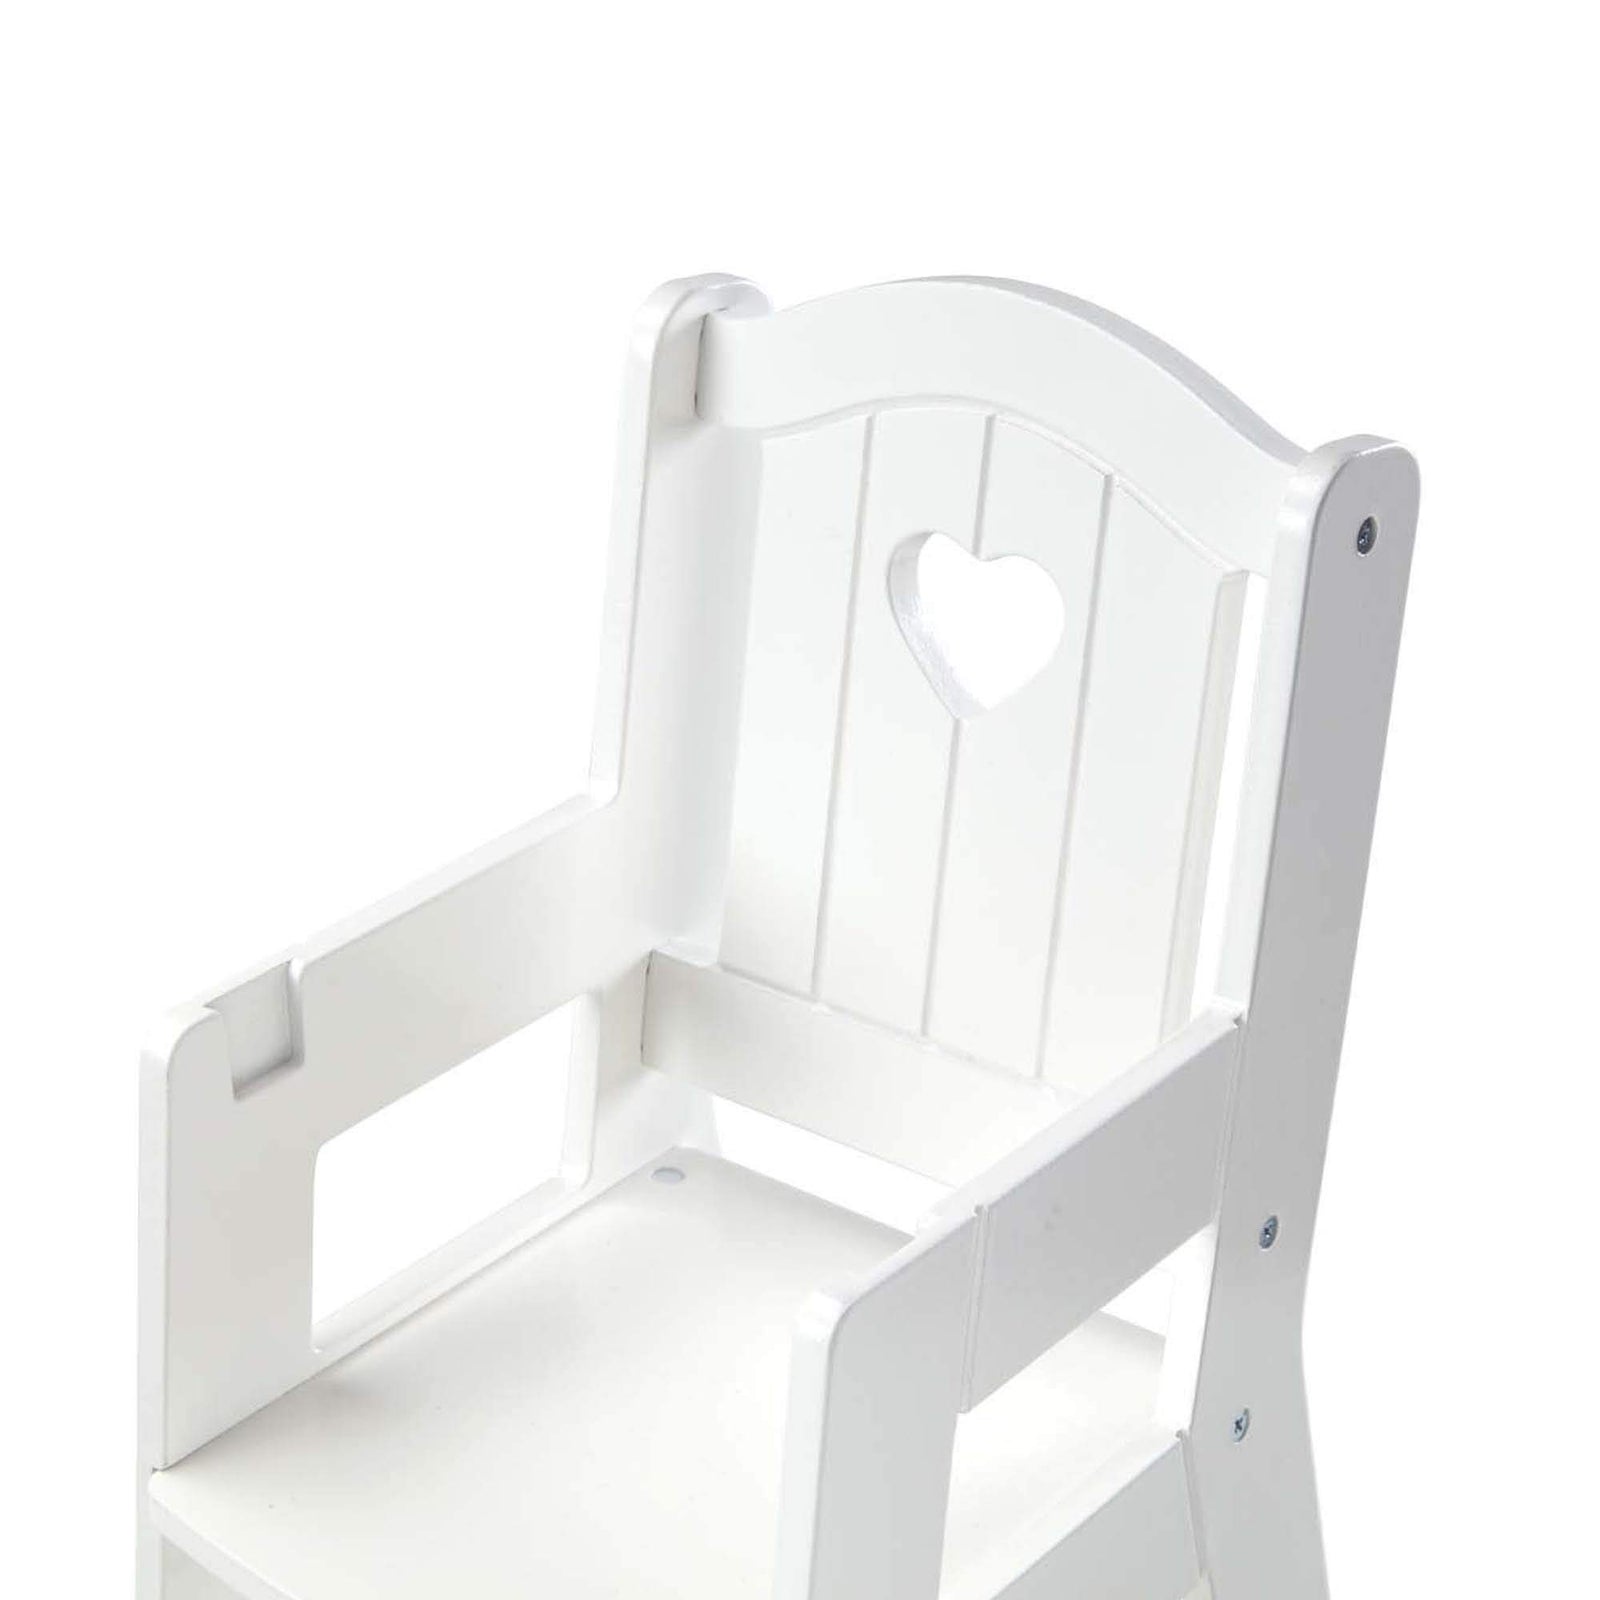 Melissa & Doug Mine to Love Wooden Play High Chair for Dolls,-Stuffed Animals - White (18”H x 8”W x 11”D Assembled)